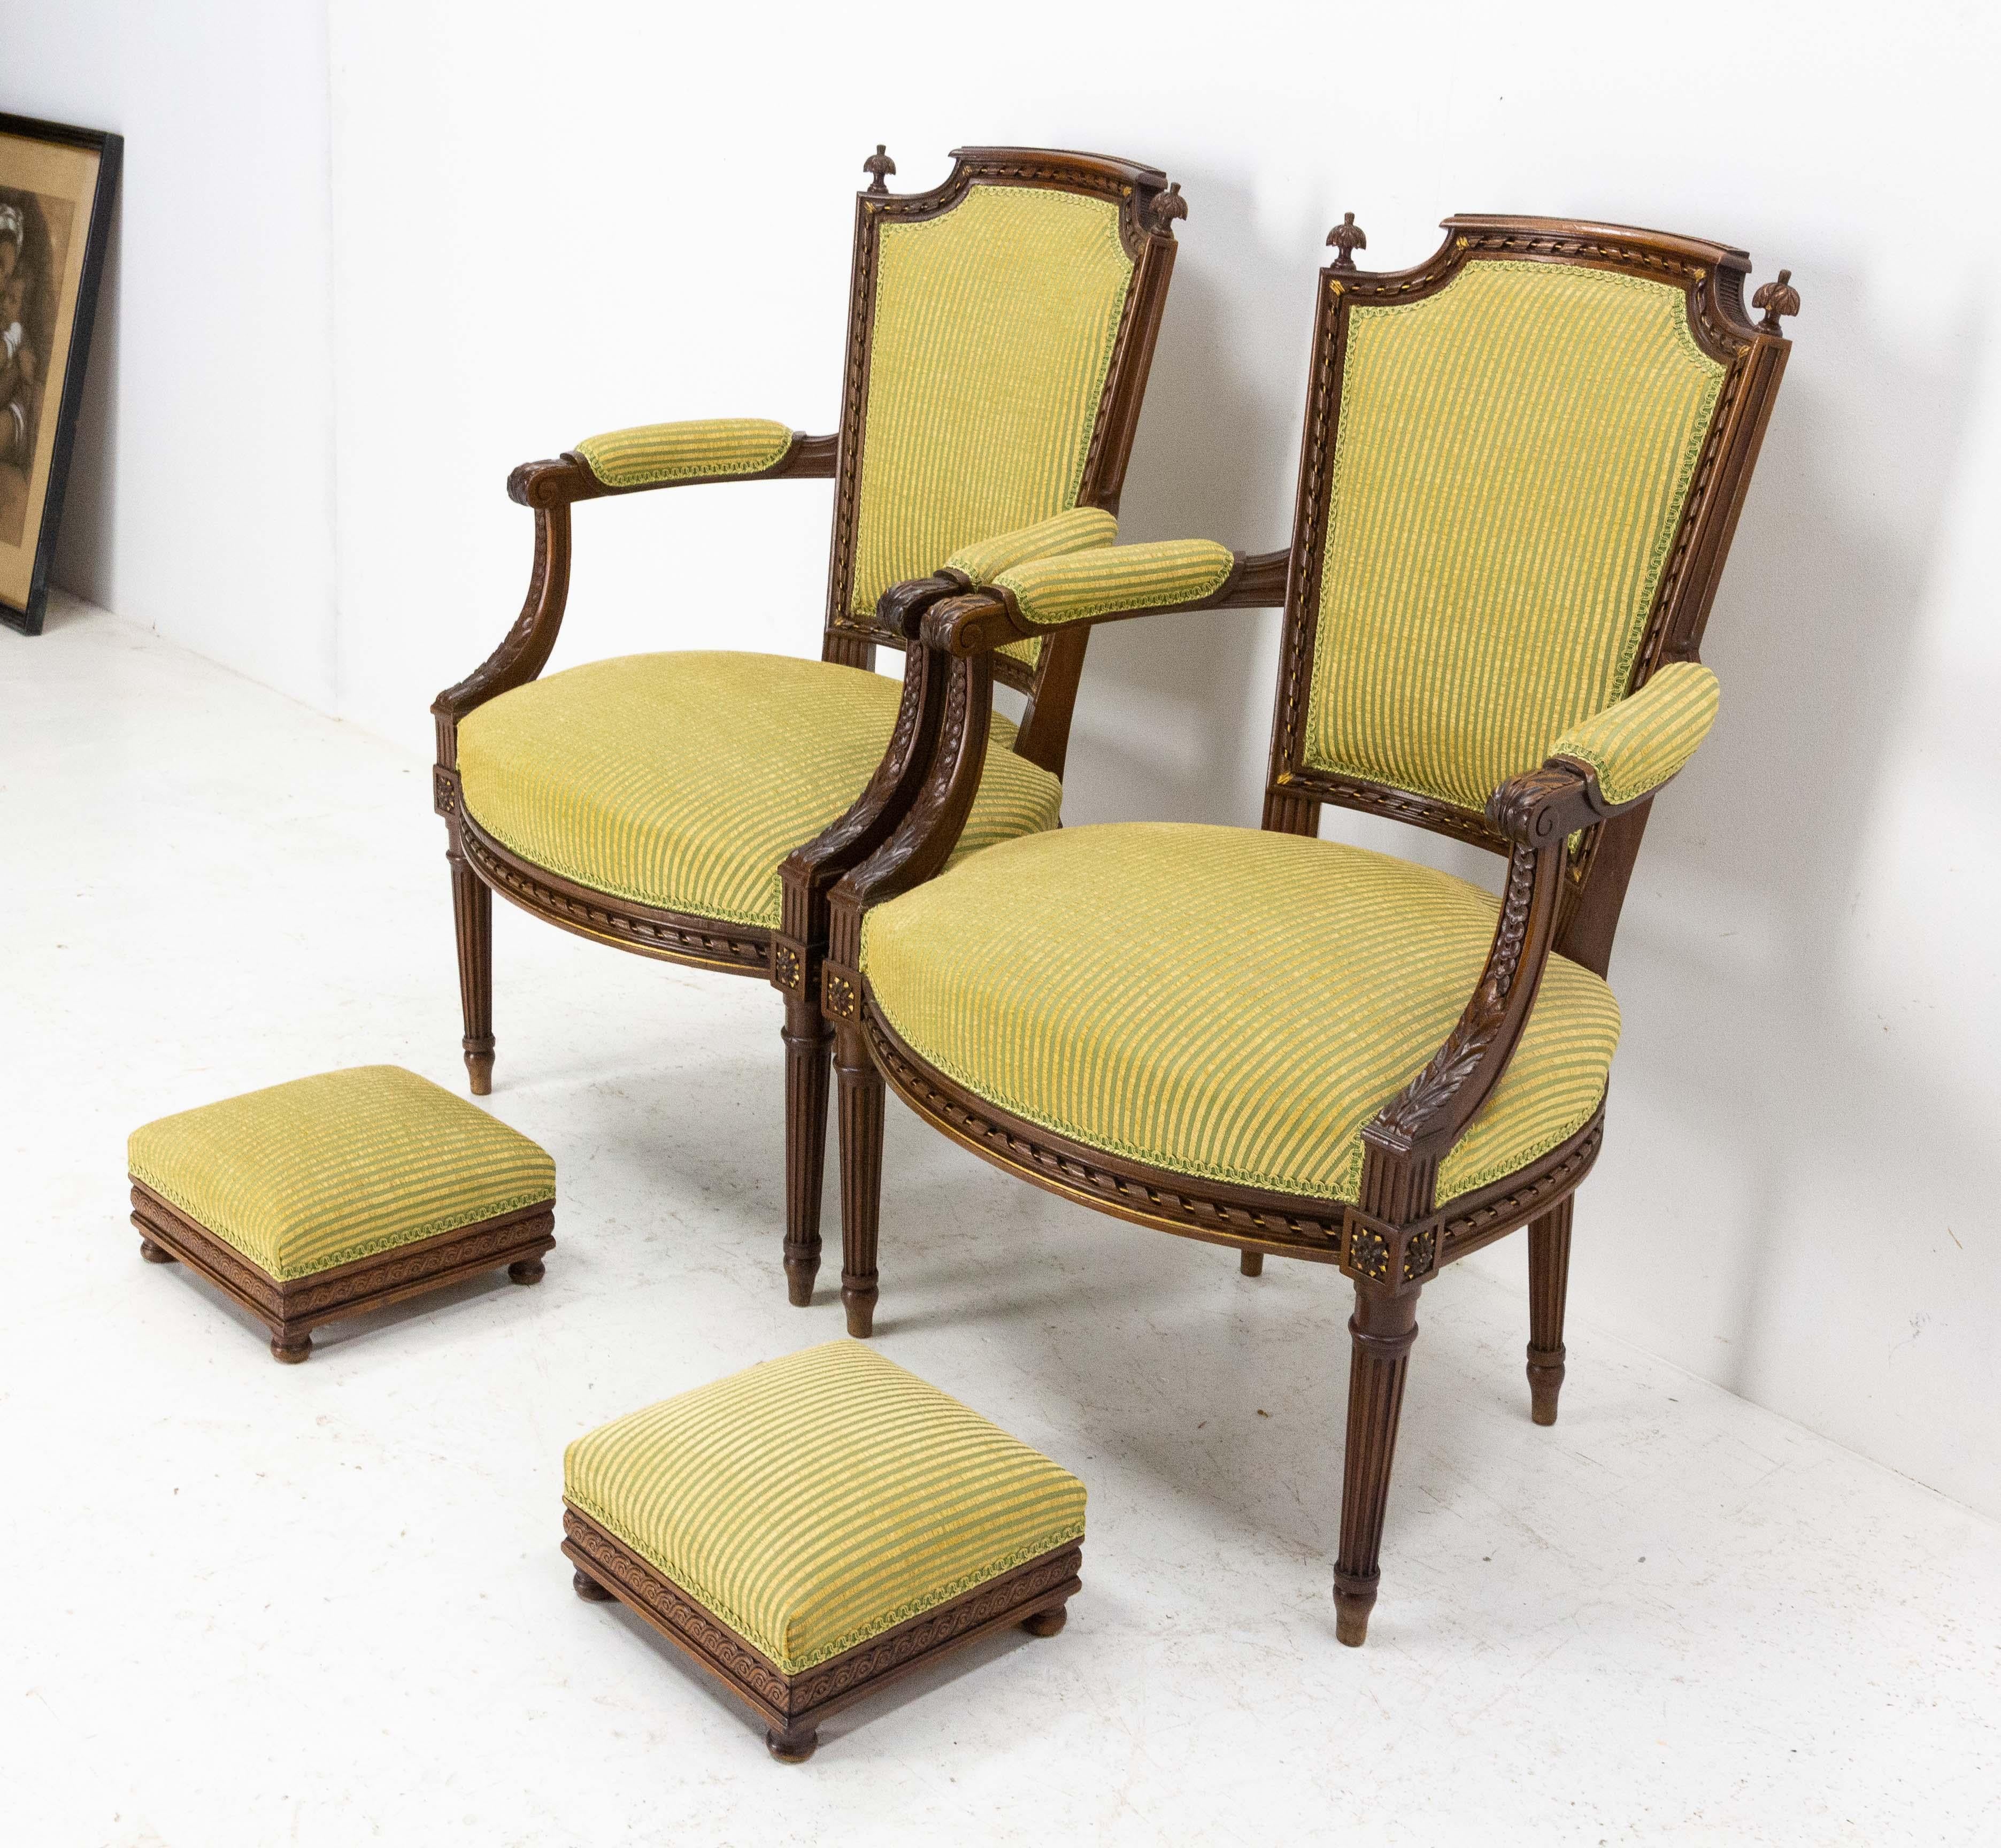 Late 19th Century Pair of Louis XVI Revival Open Armchairs French with Footstools, Midcentury For Sale